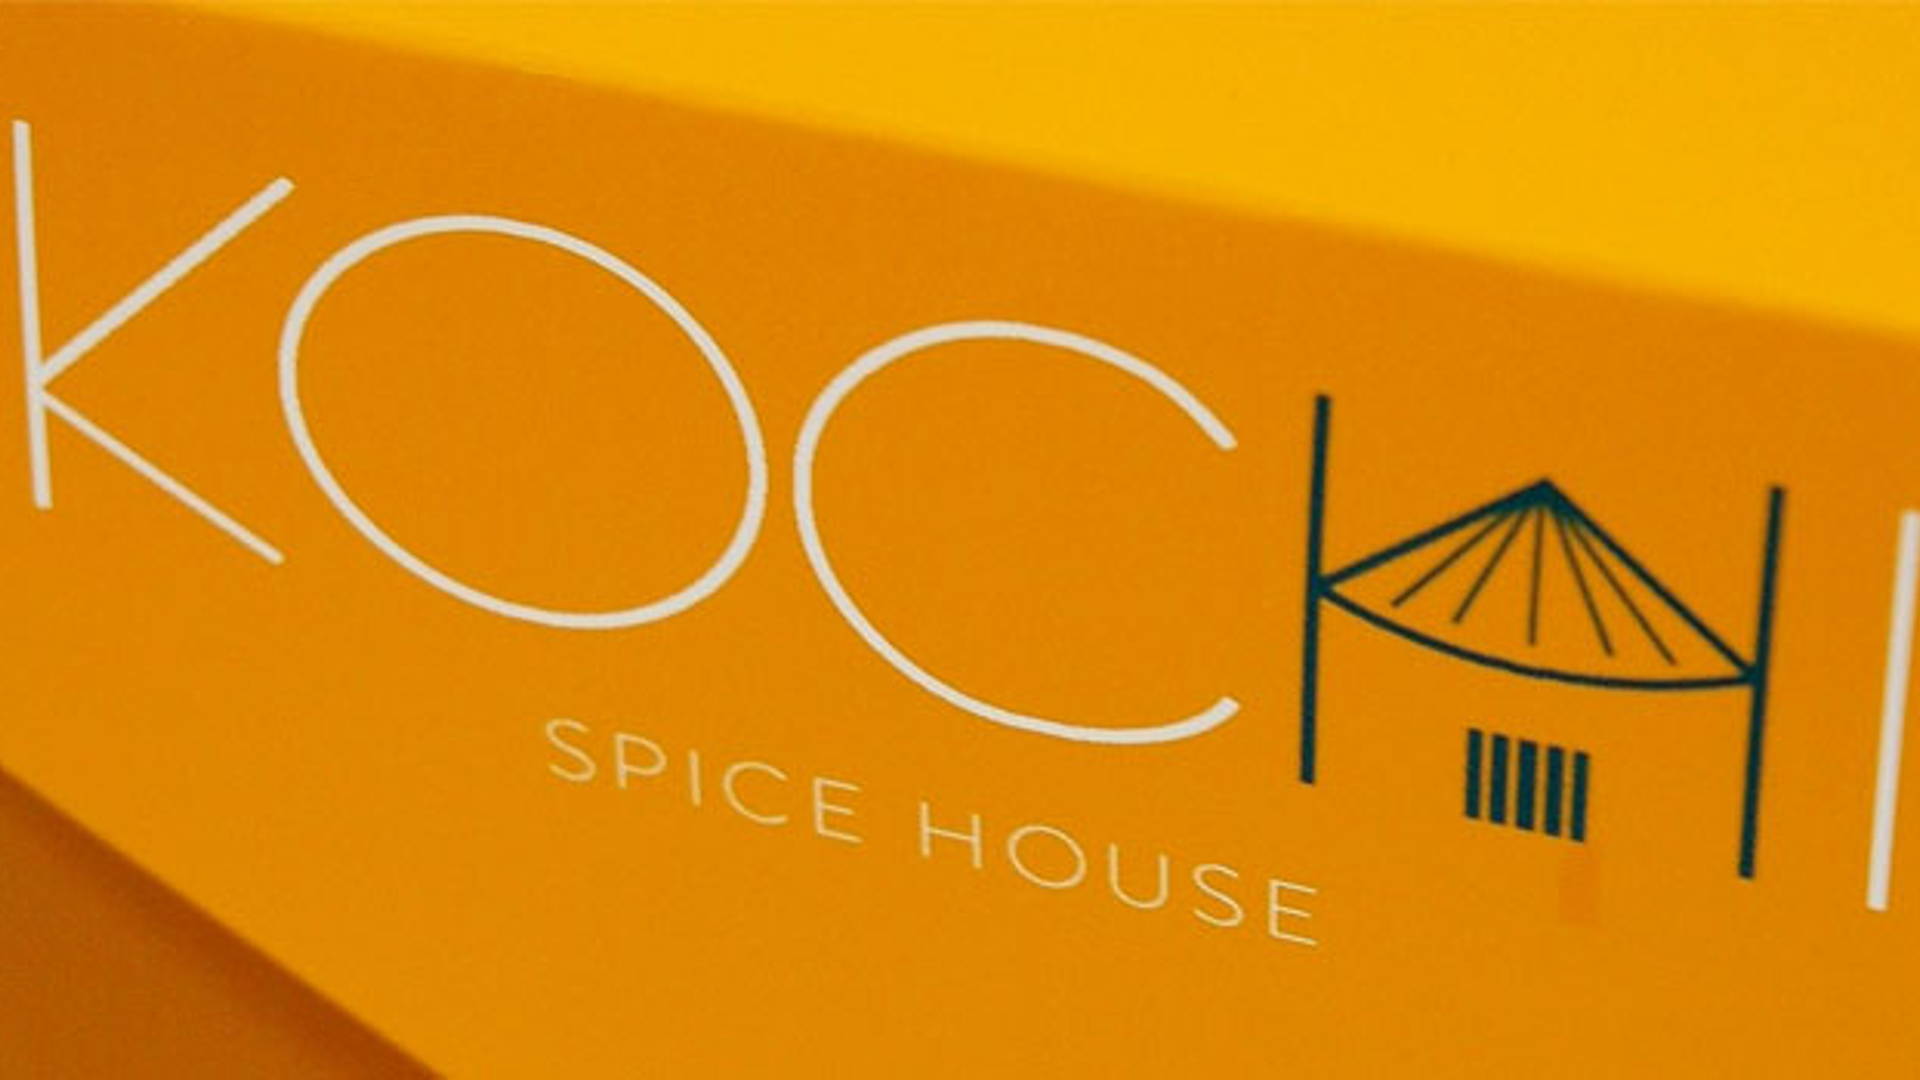 Featured image for Student Spotlight: Kochi Spicehouse